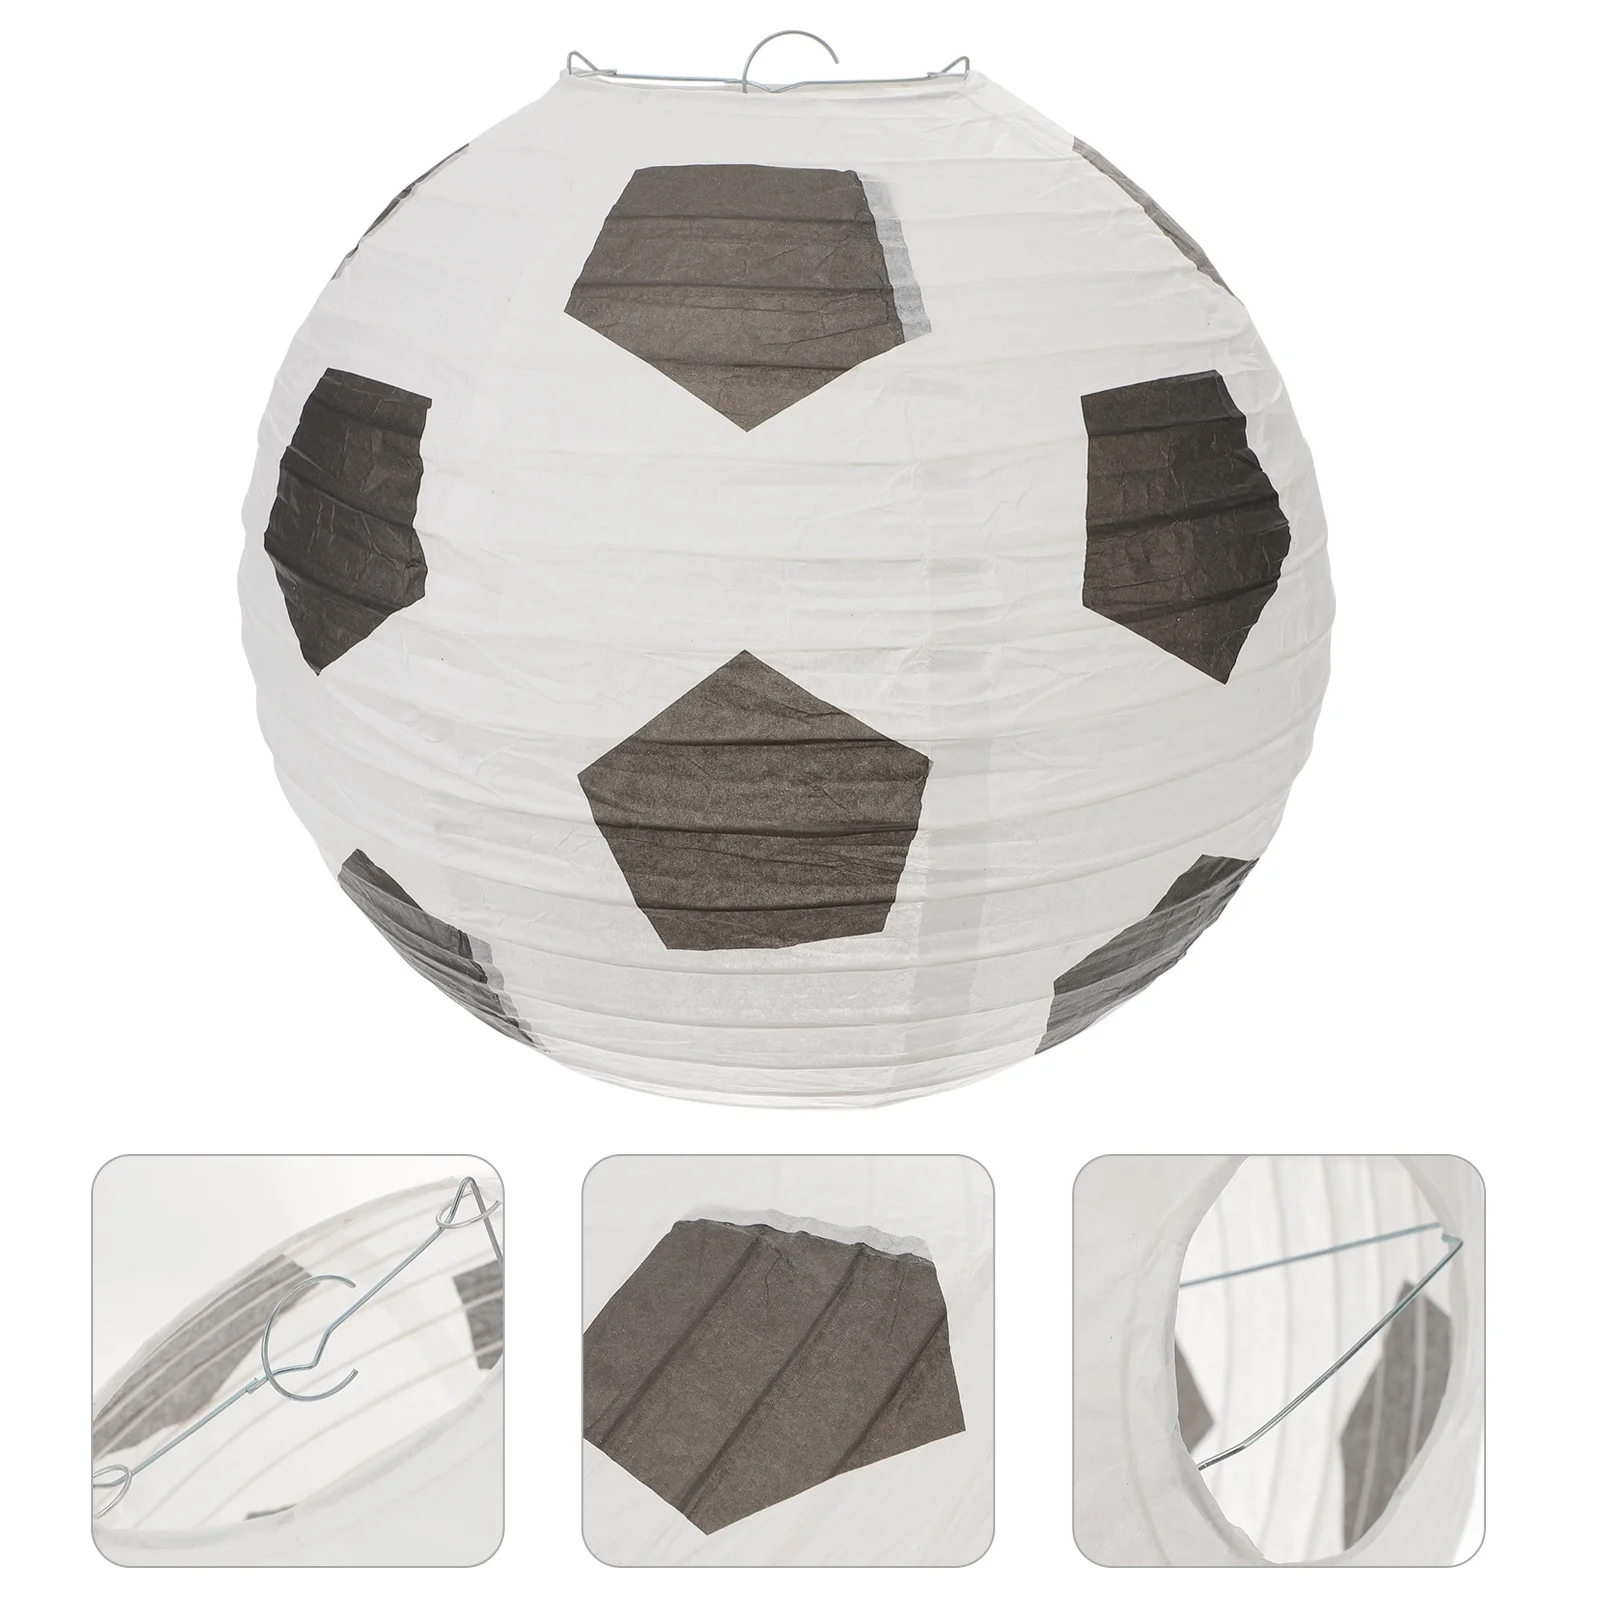 Lantern Paper Hanging Ball Lanterns Soccer Decorations Party Football Chinese Japanese Sports Cup Lamp Ceiling Decorative